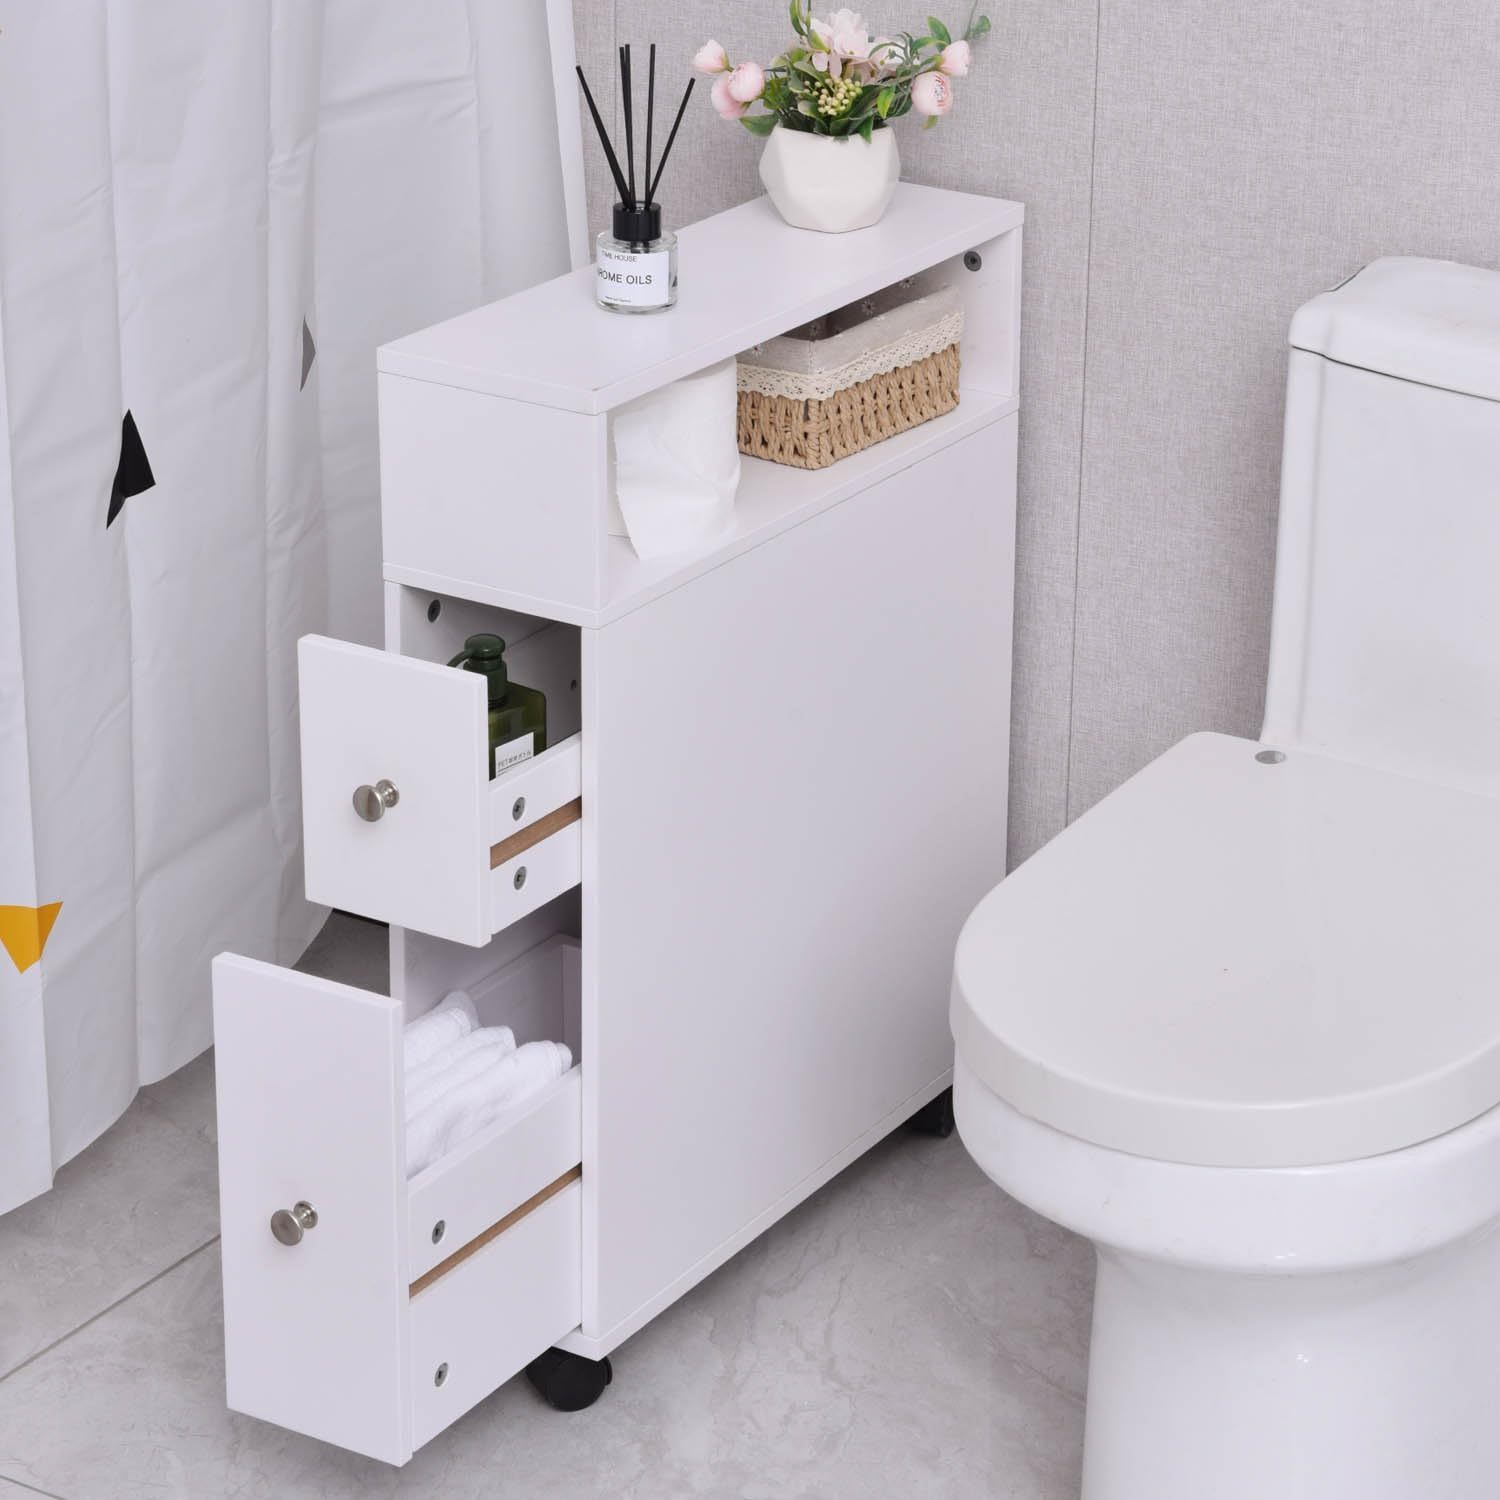 

Ceredeme Small Bathroom Storage Cabinet, Toilet Paper Holder With Slide Out Drawers For Small Space, Narrow Floor Bathroom Organizer Next To Toilet